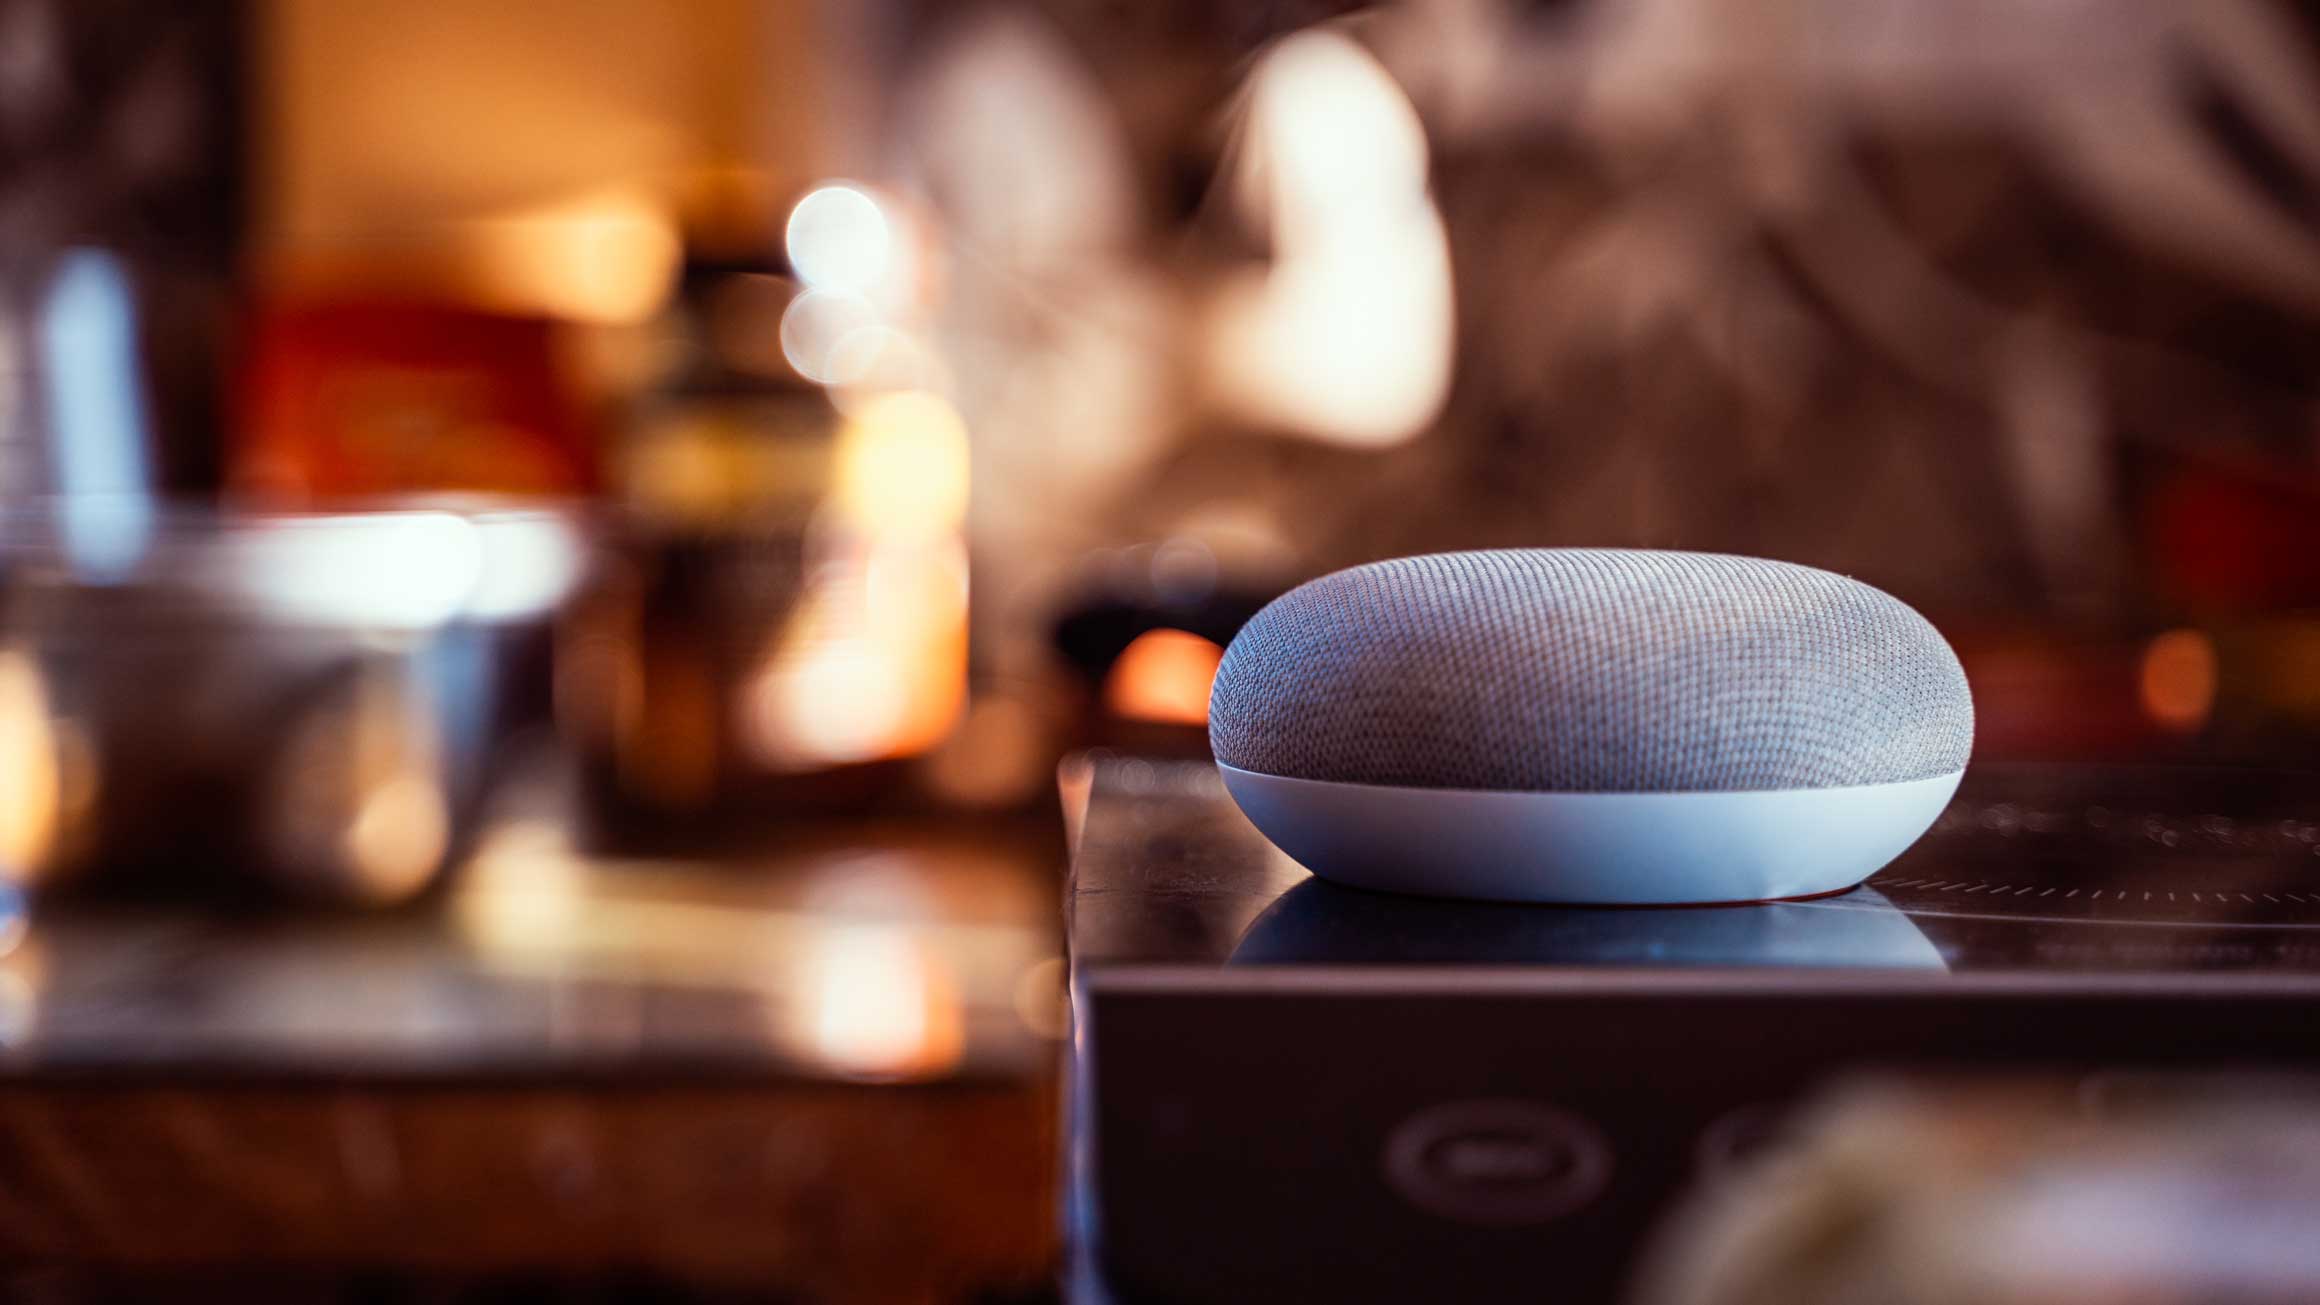 A Google Home device sits on a surface.